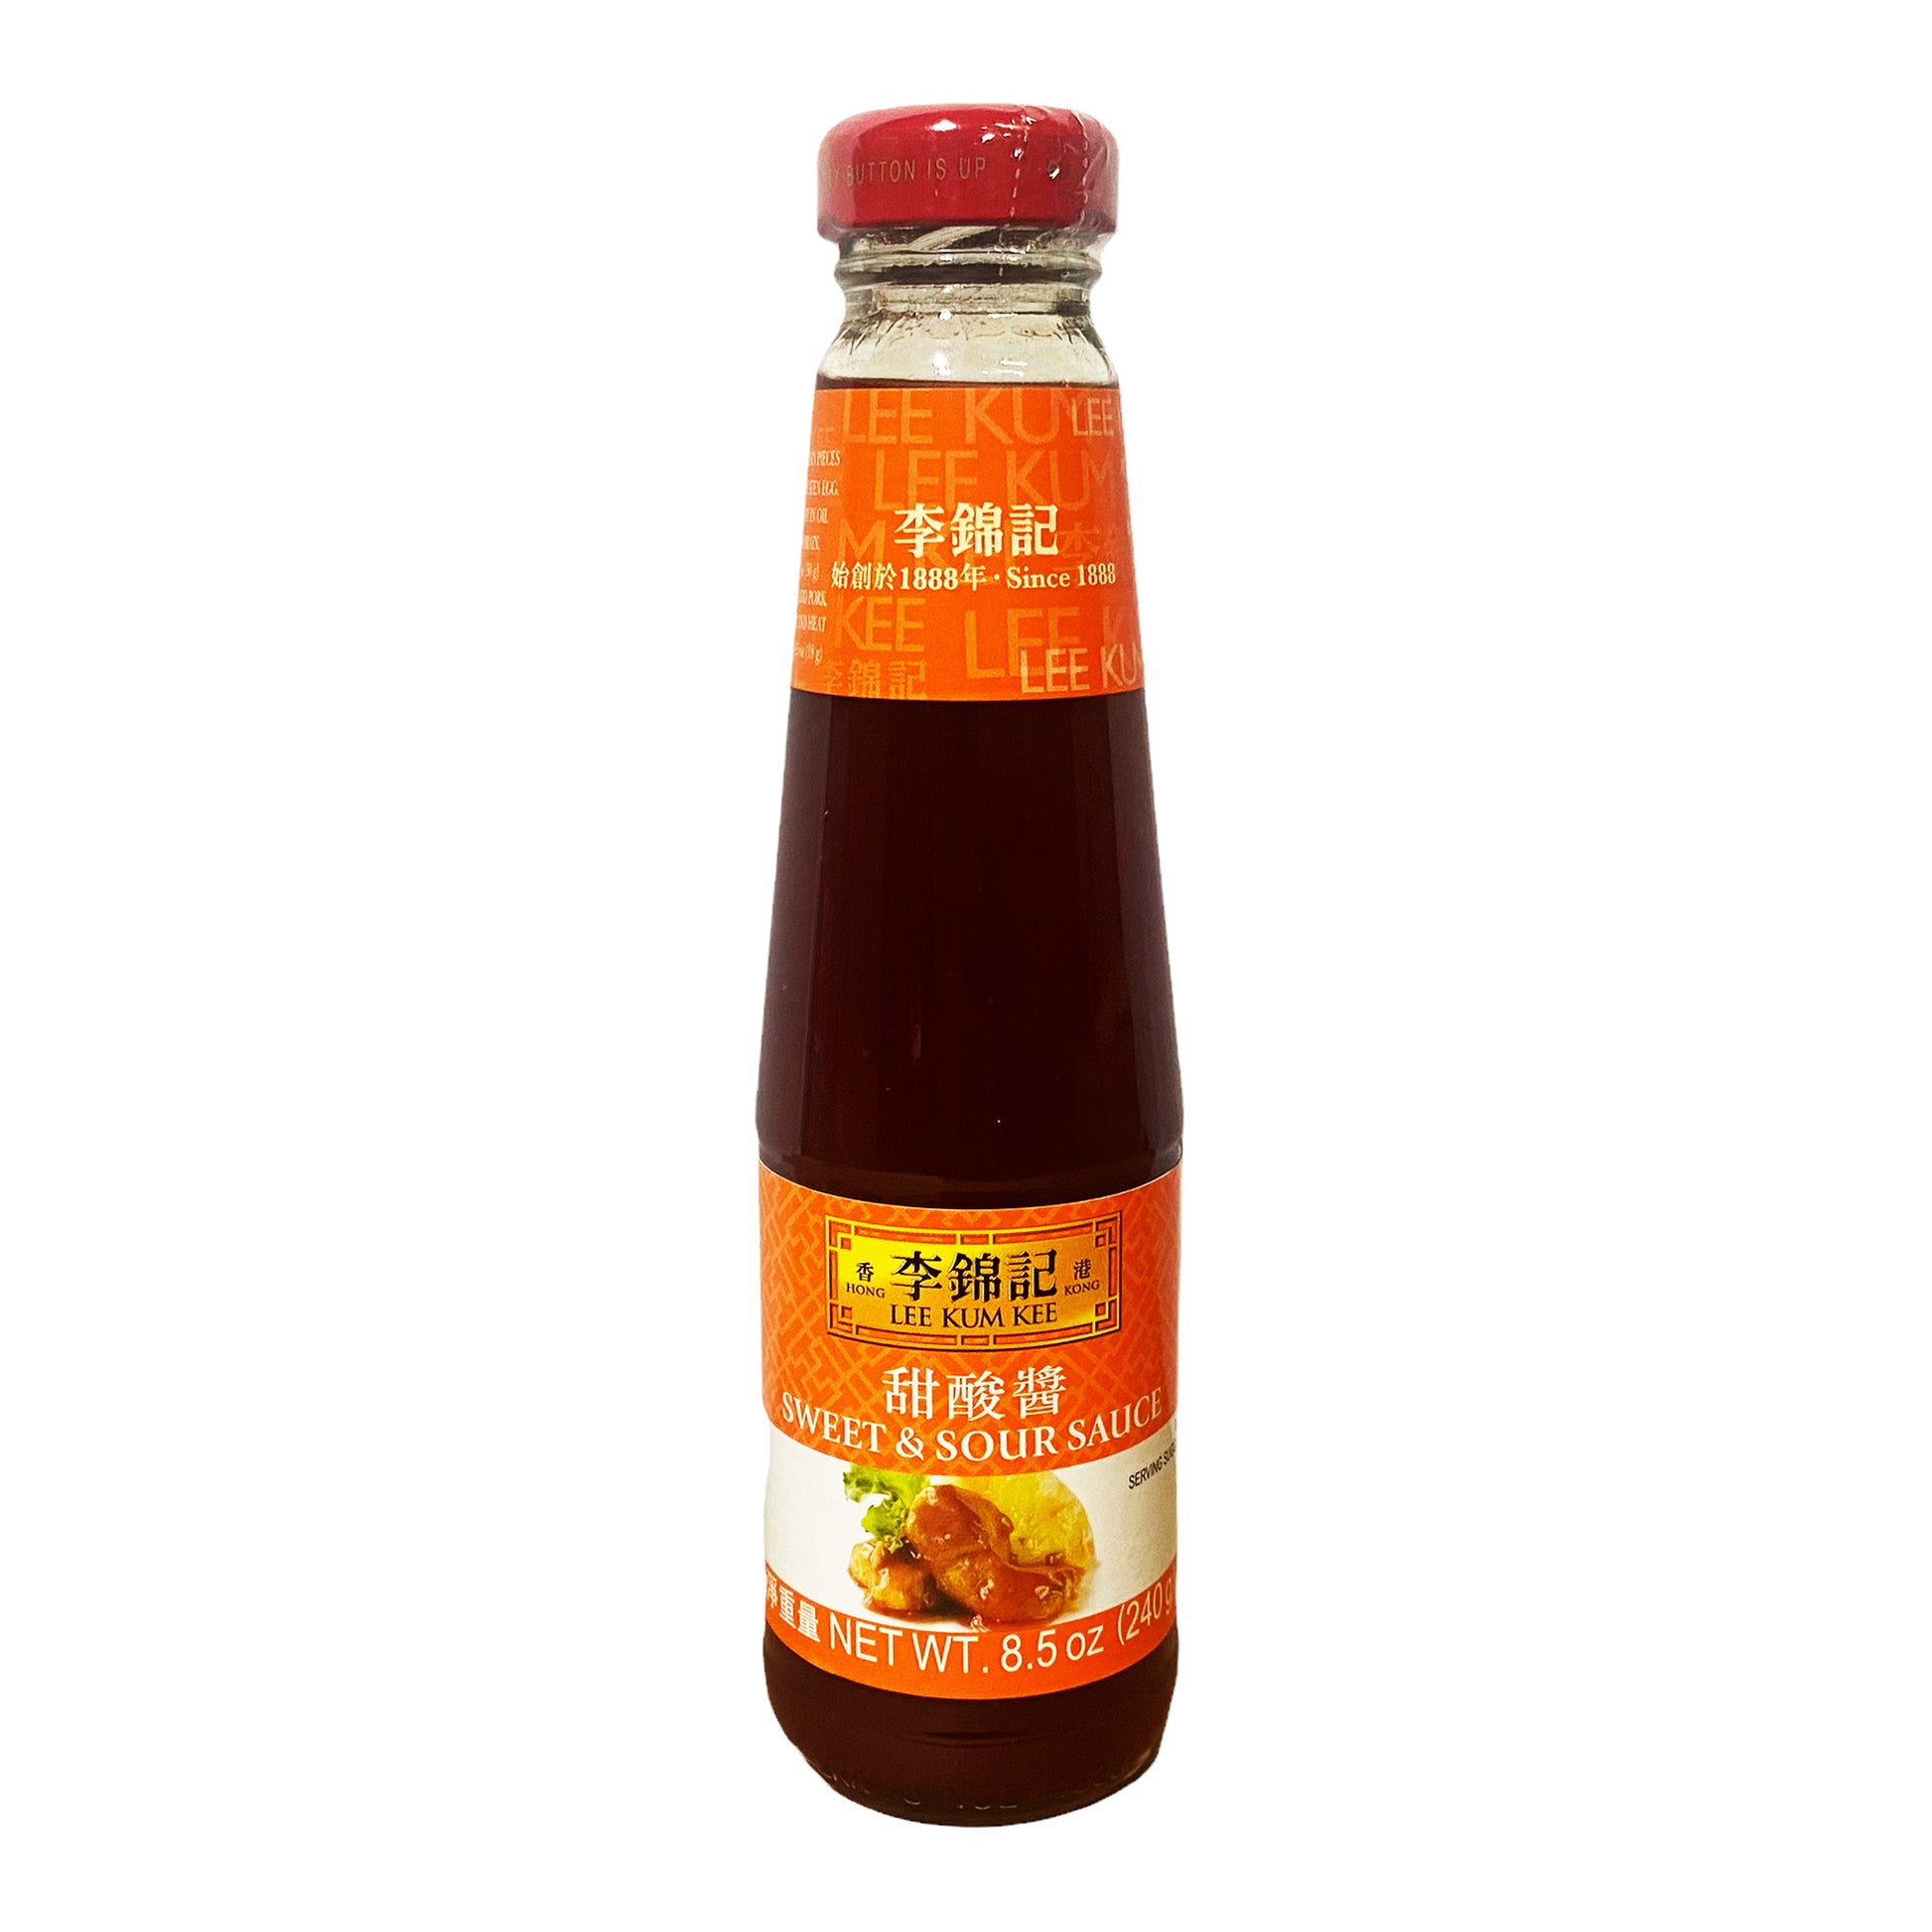 Front graphic image of Lee Kum Kee Sweet & Sour Sauce 8.5oz - 李锦记 甜酸酱 8.5oz